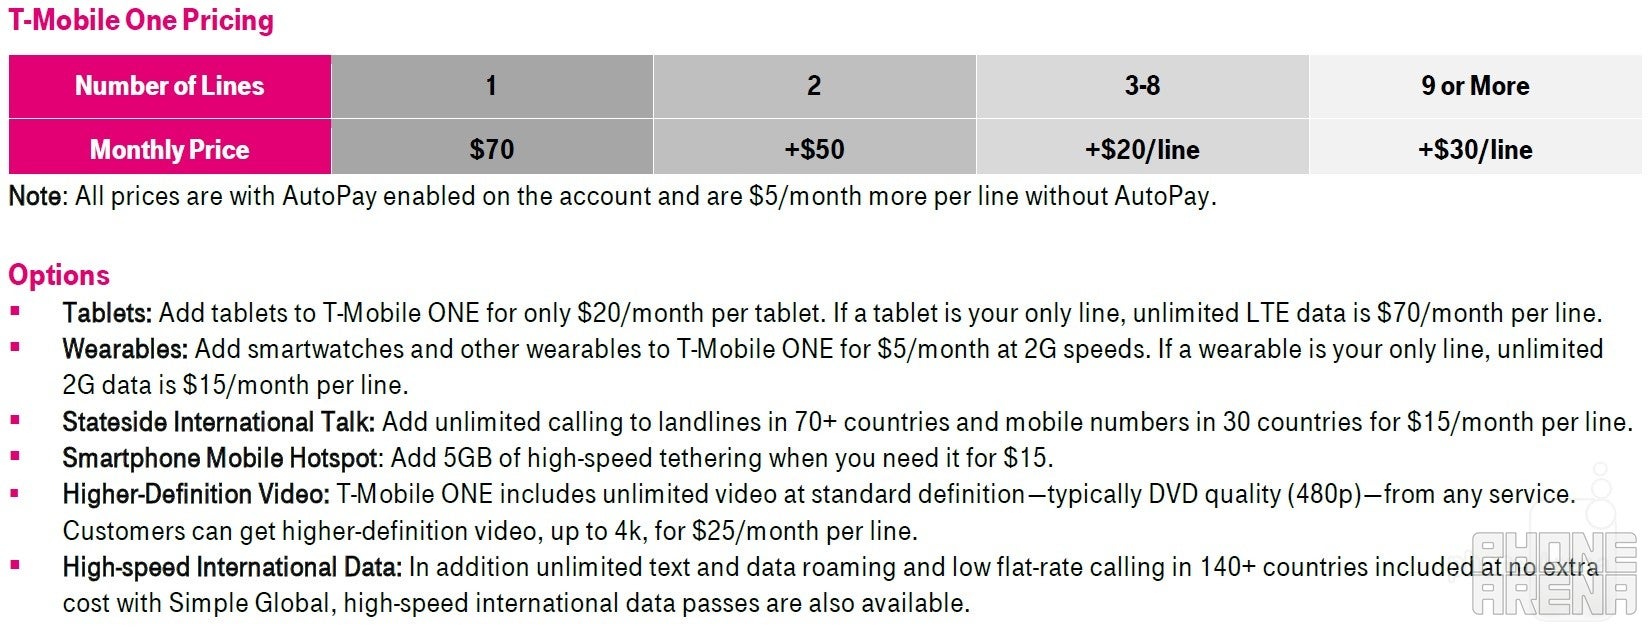 If you stick to standard resolution video, this plan is pretty hard to beat, but the extras can erode value quickly. - T-Mobile blows the doors open again, still a lot of small print and the net neutrality debate is not over